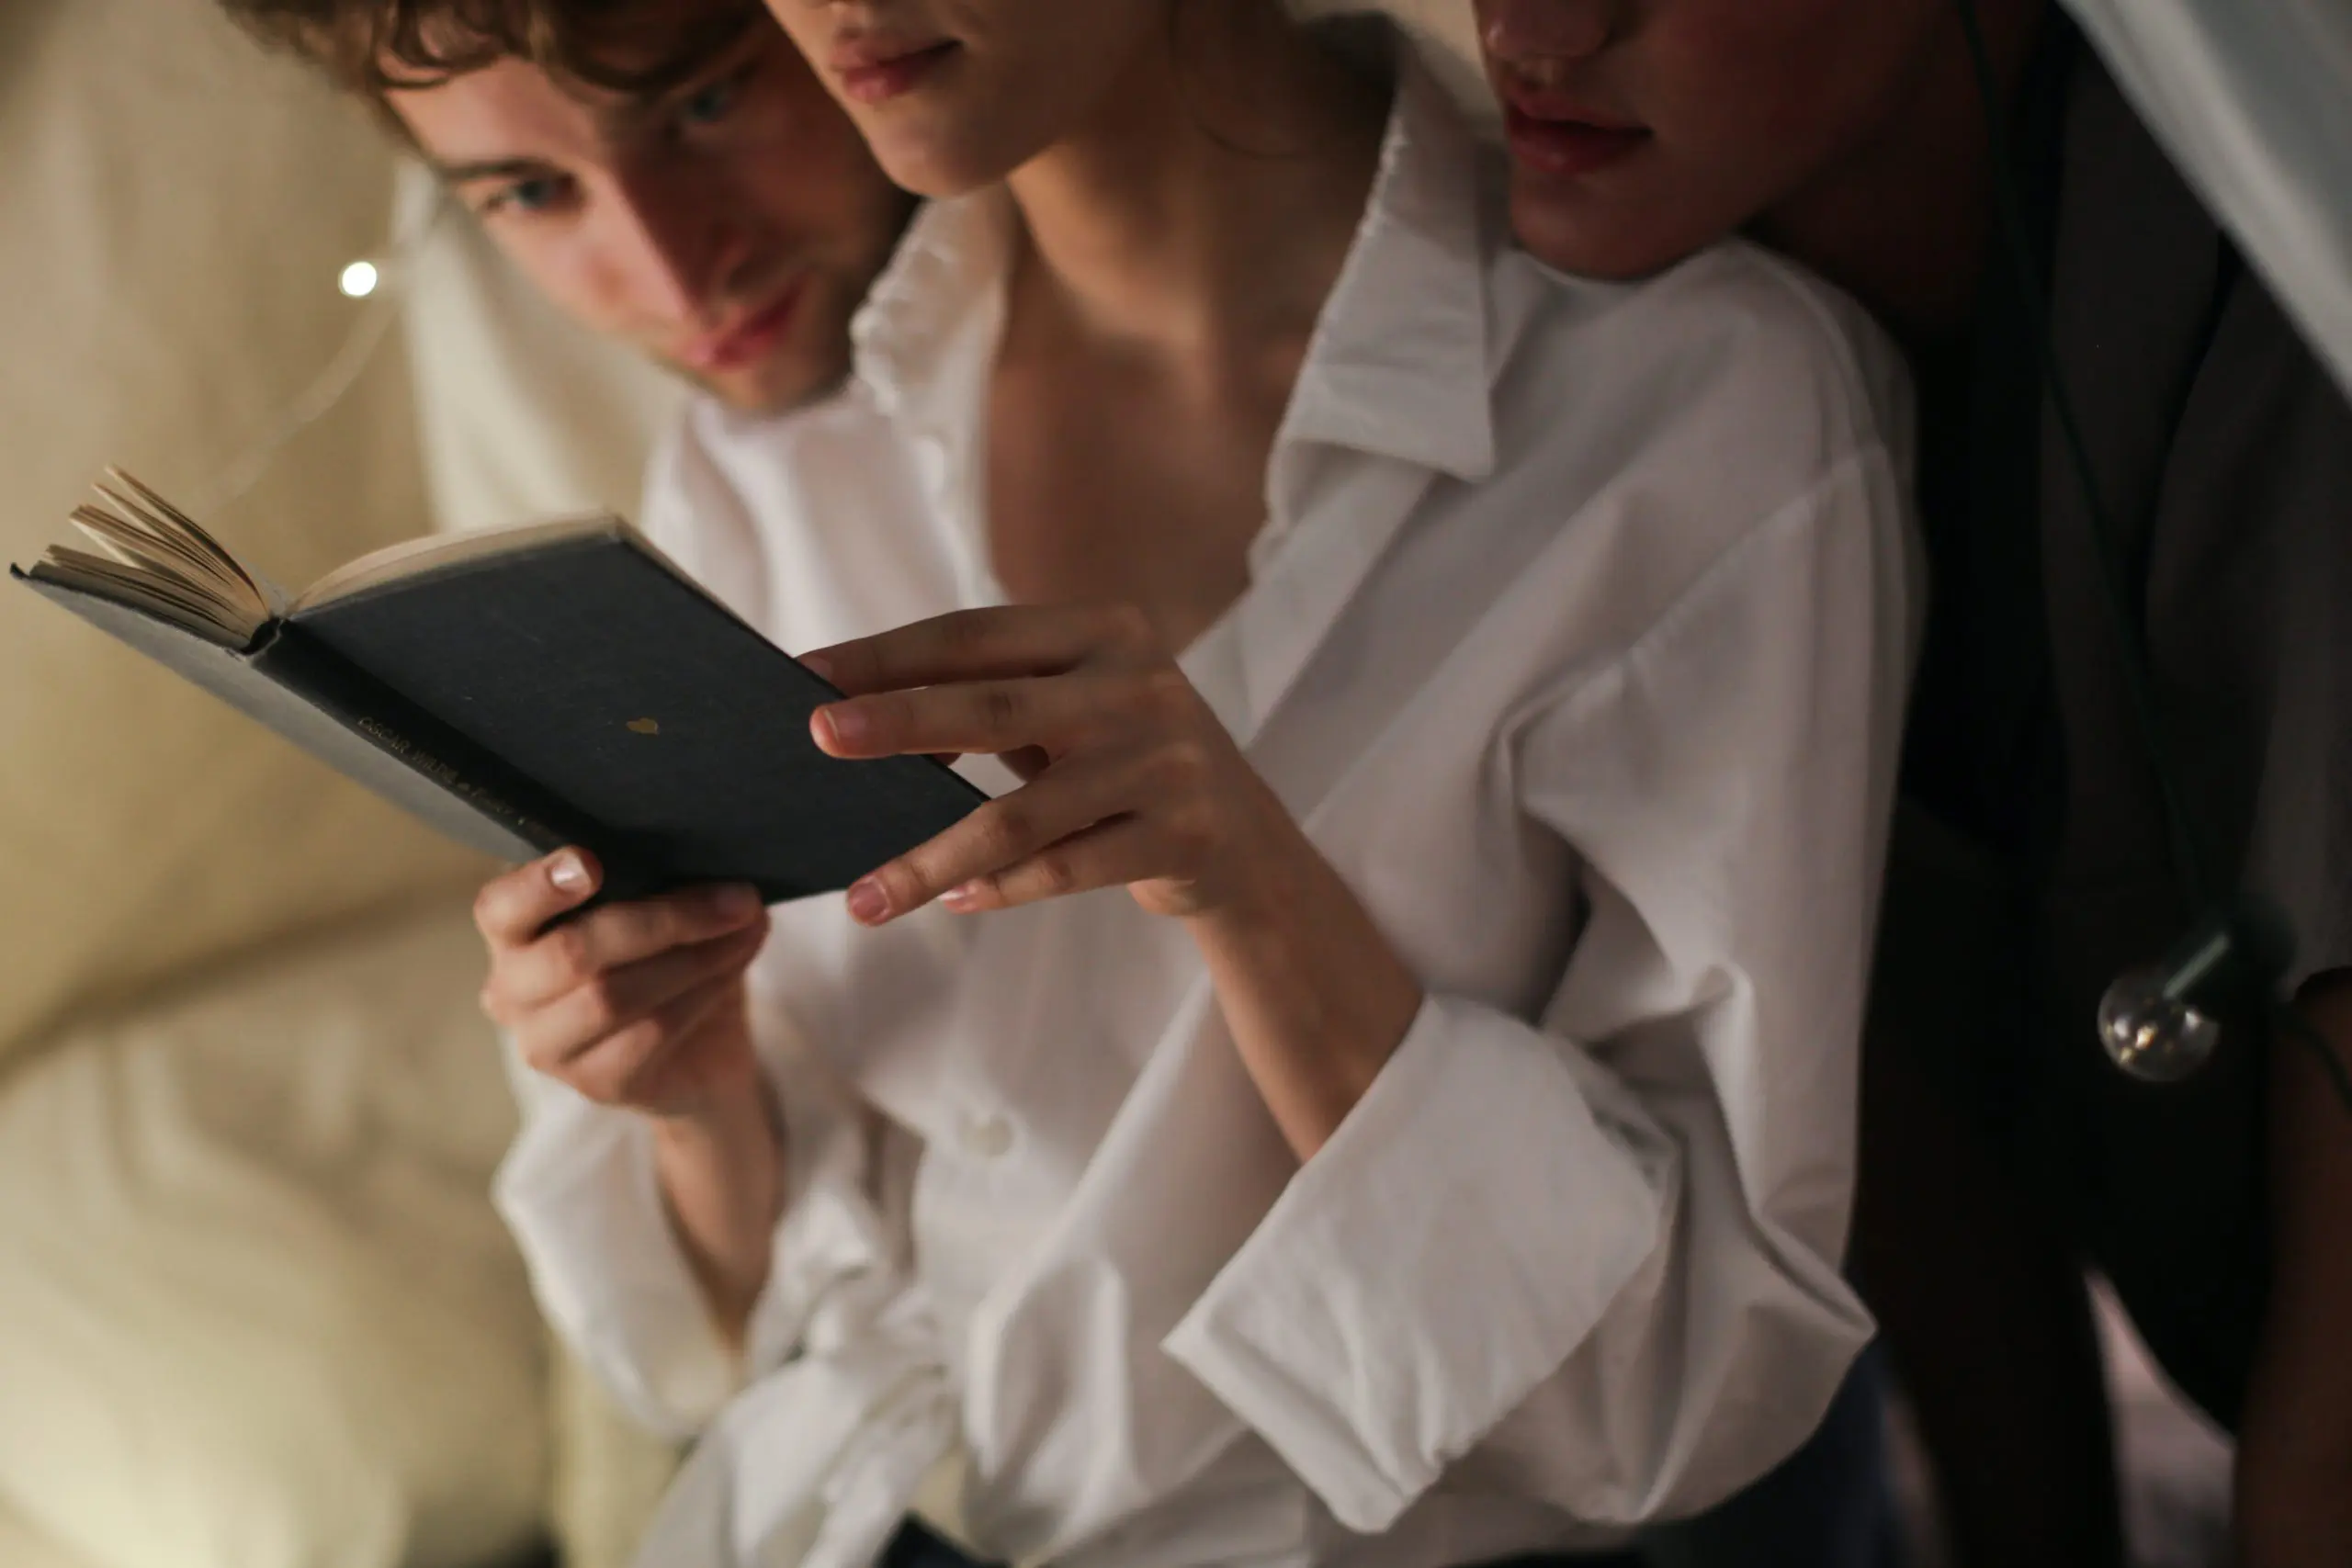 two guys and one woman reading an agenda Navigating Non-Monogamy